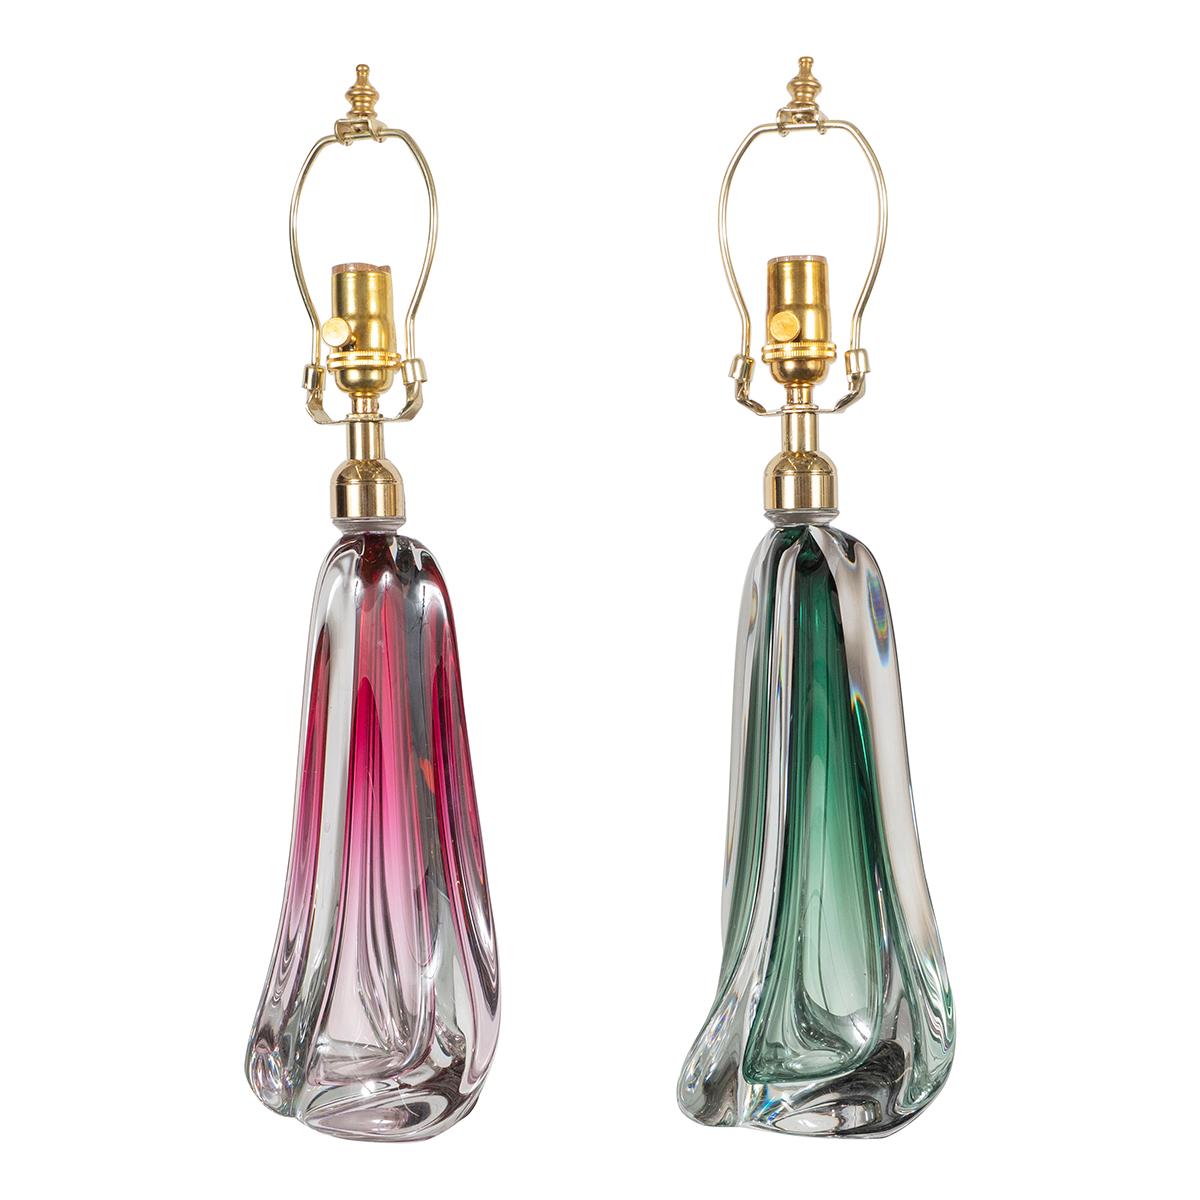 Pair of amorphic twist murano glass lamps with green and pink sommerso effects.